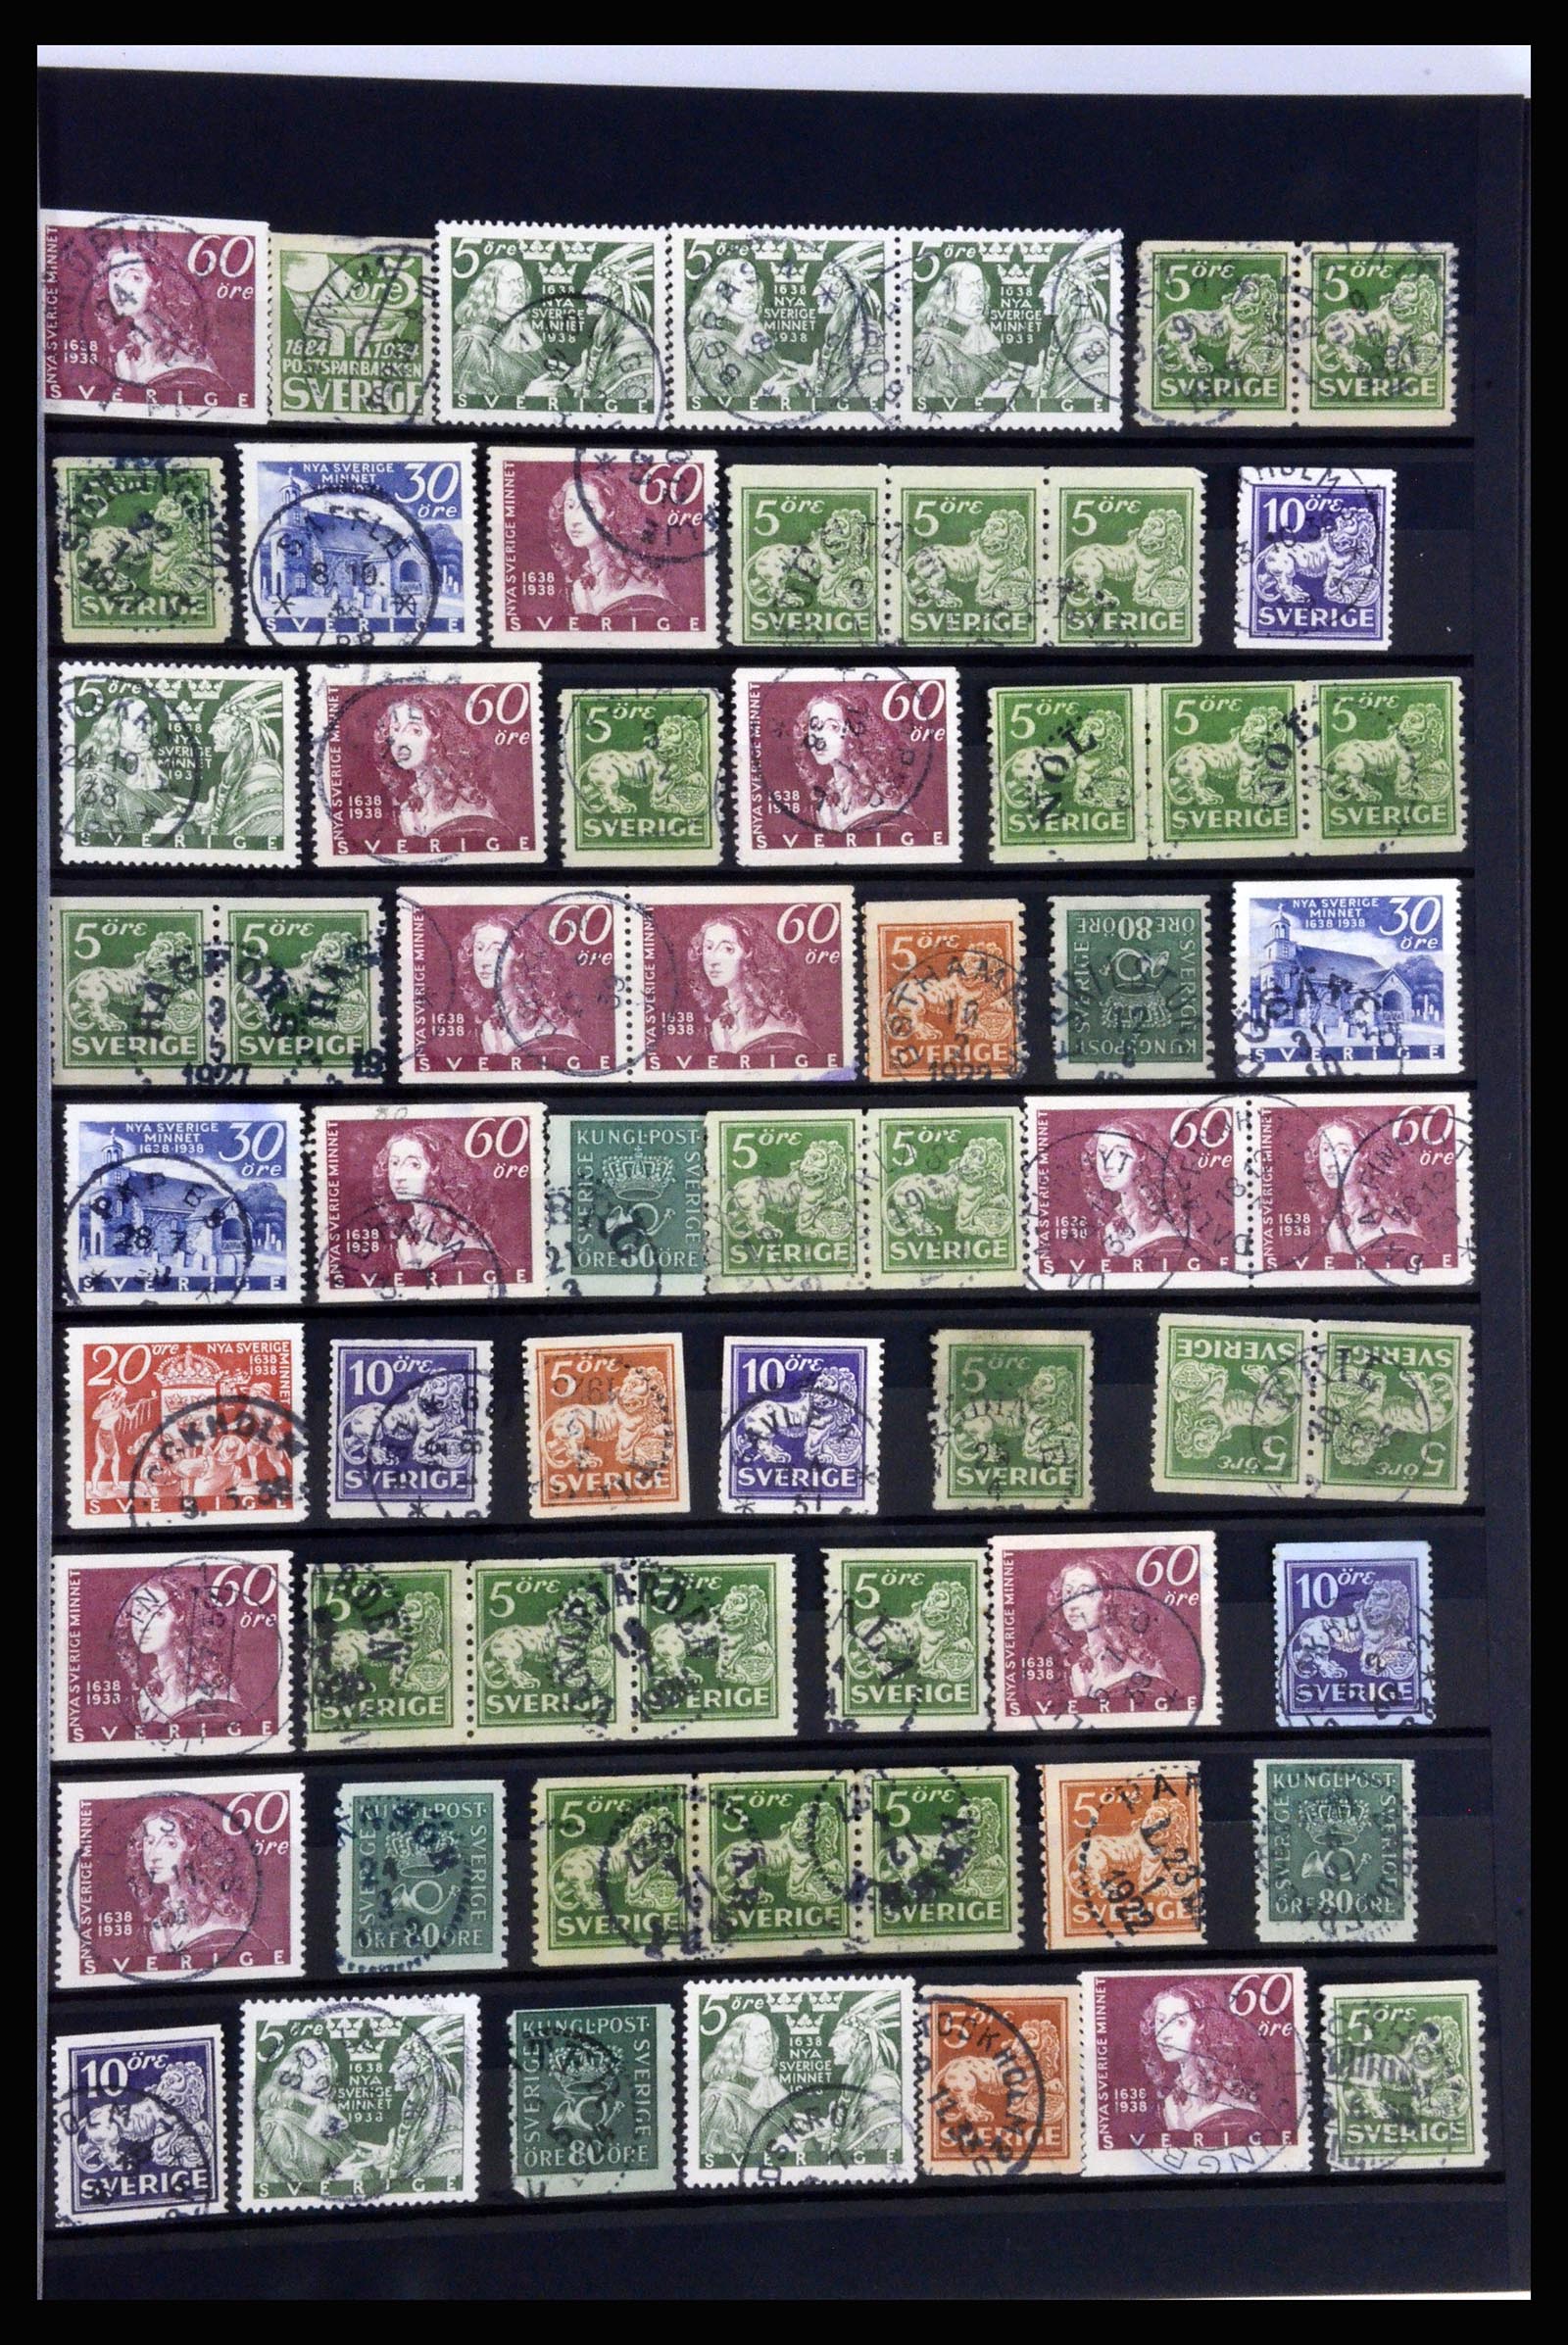 36316 033 - Stamp collection 36316 Sweden cancellations 1920-1938.